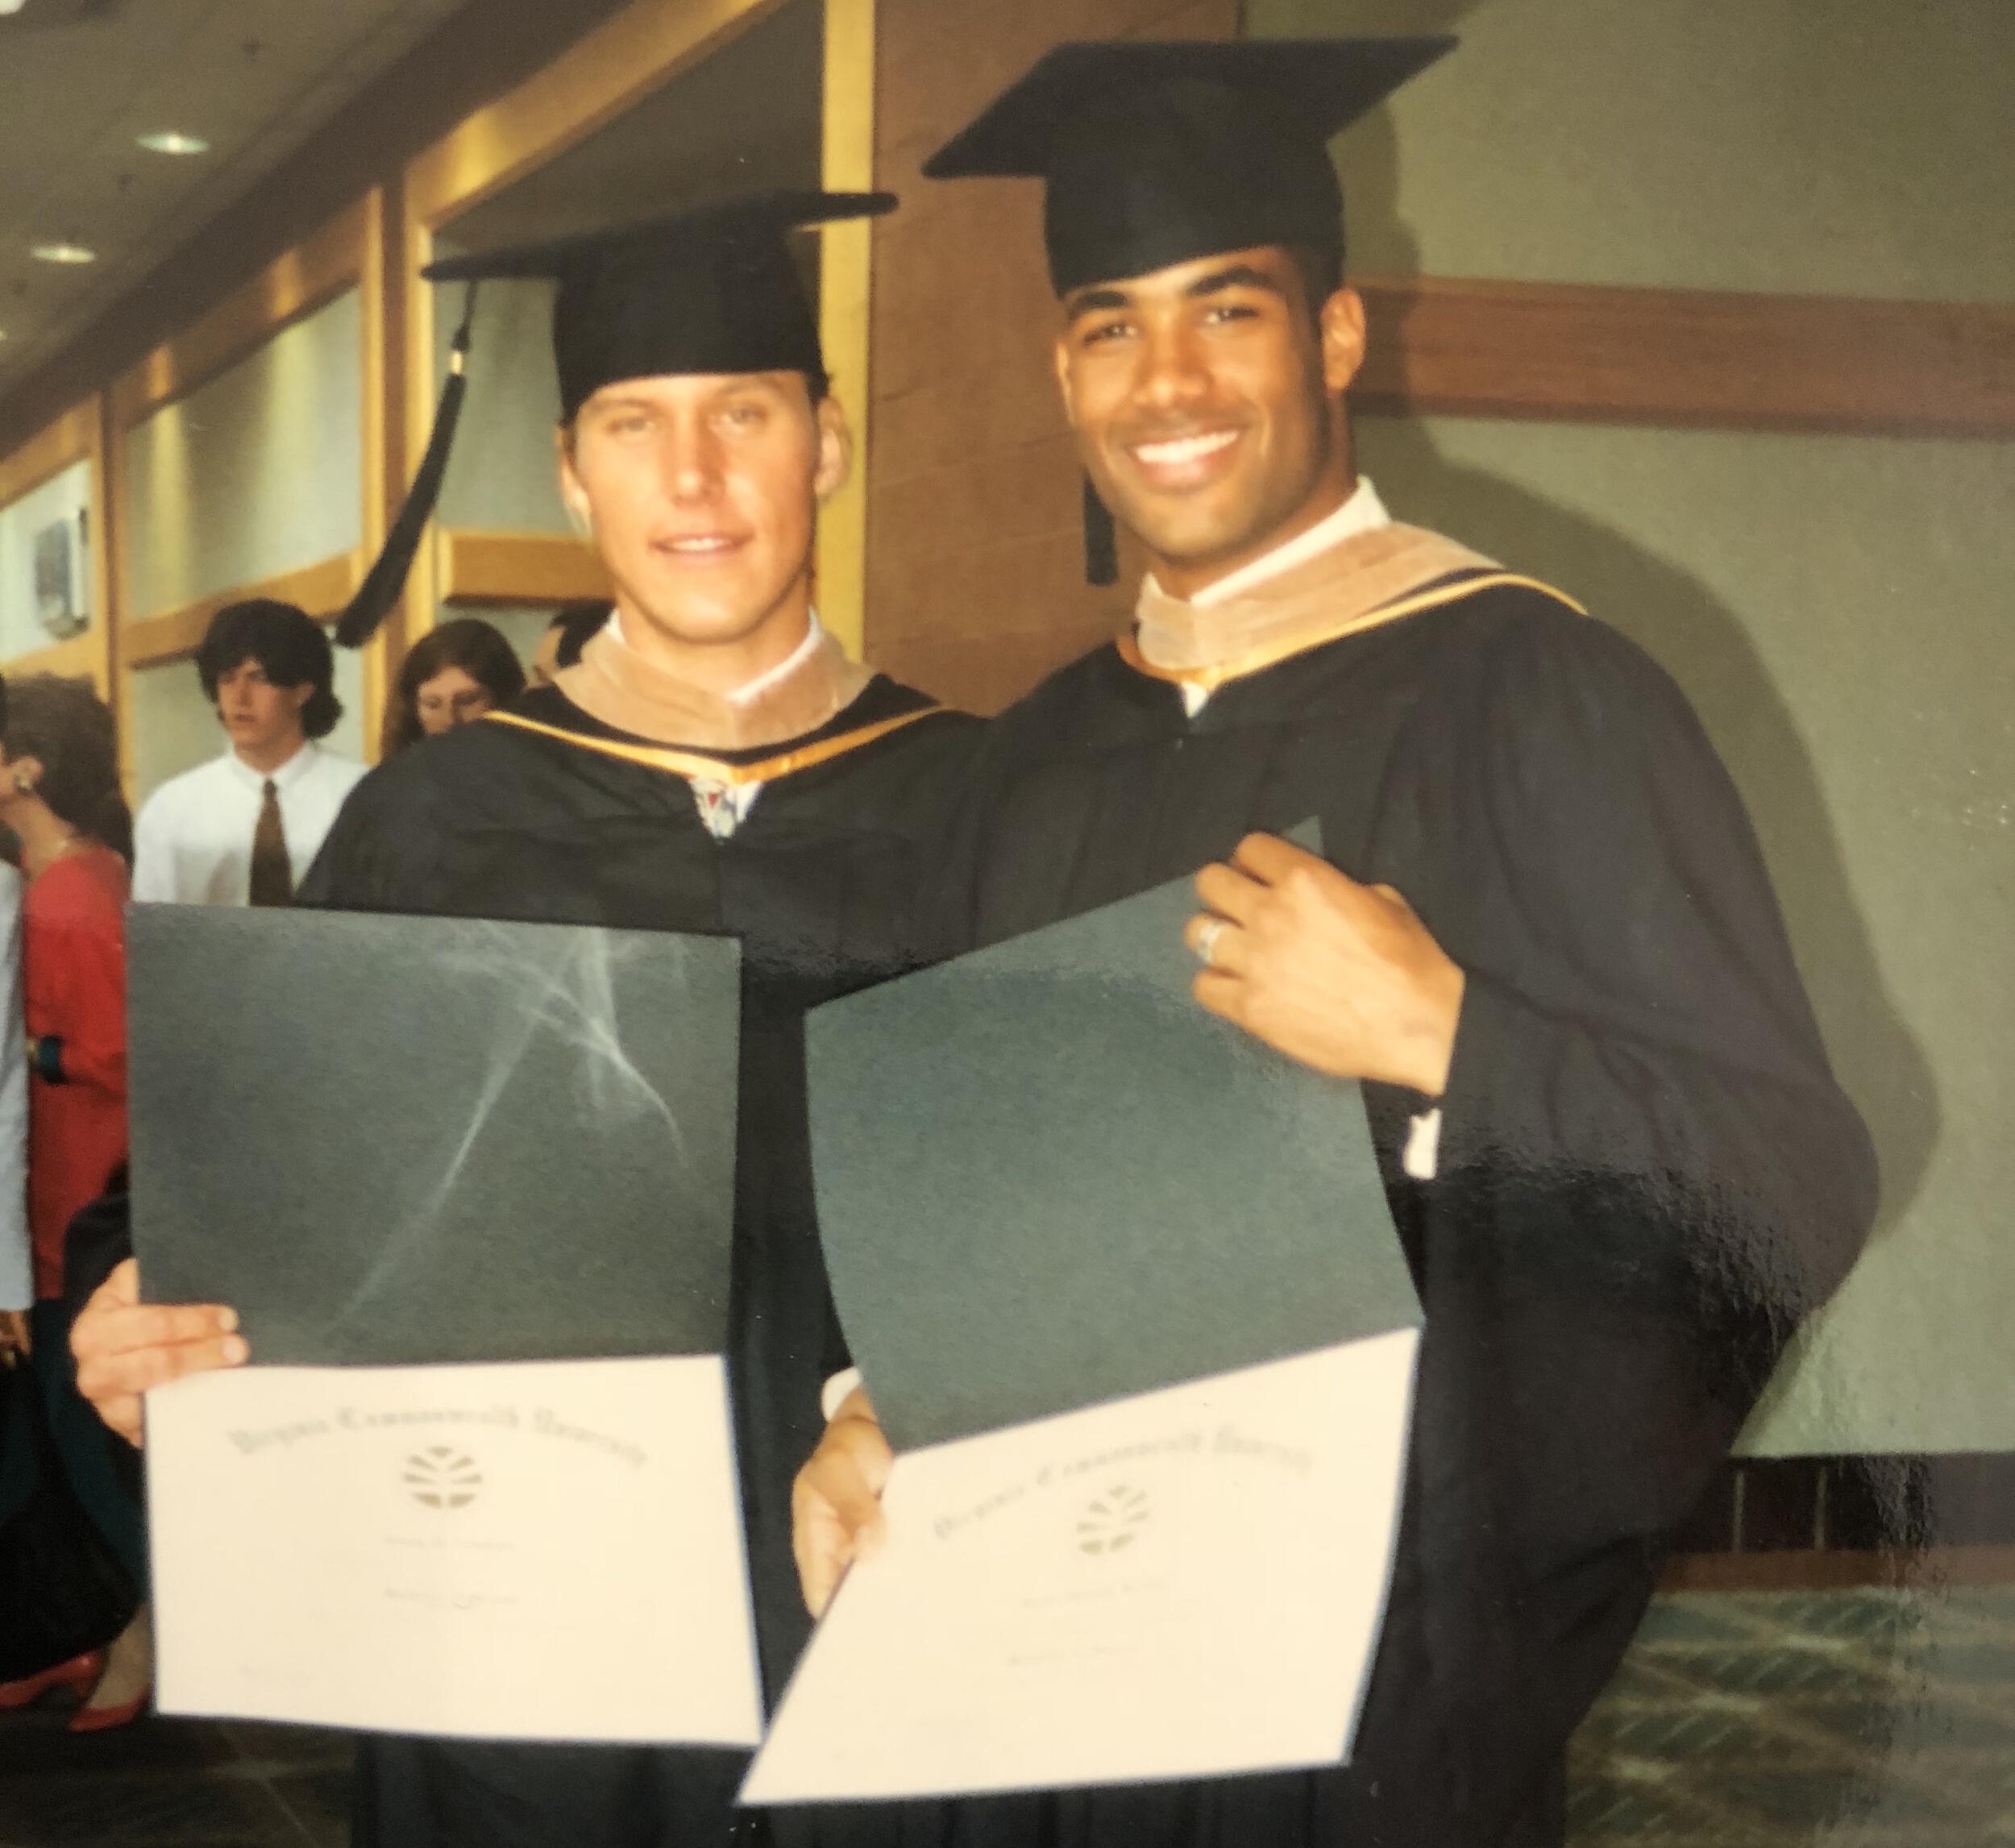 Boris Kodjoe after graduating from VCU in 1996 with Jonas Elmblad, four years after both arrived in Richmond as tennis recruits. (Photo courtesy of Jonas Elmblad)